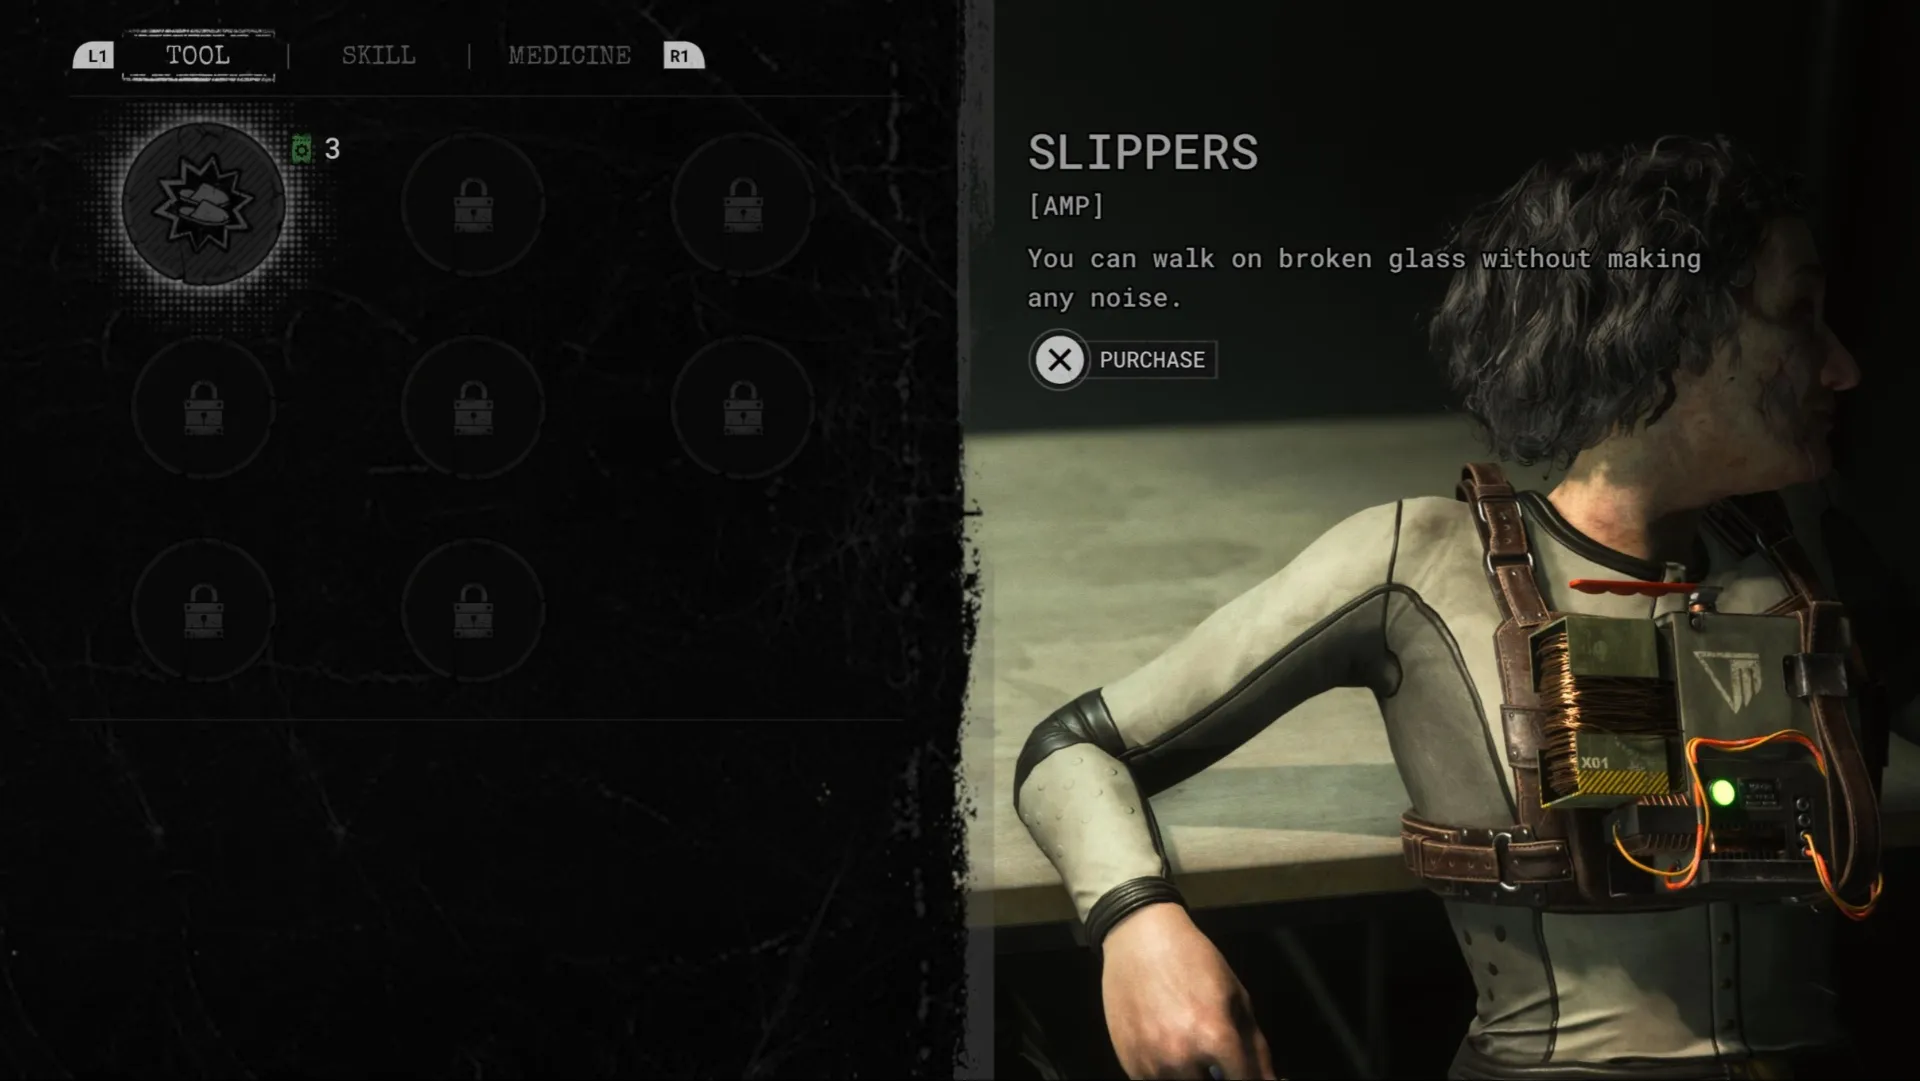 The Slippers mp, which allows you to walk on glass without making noise in The Outlast Trials.